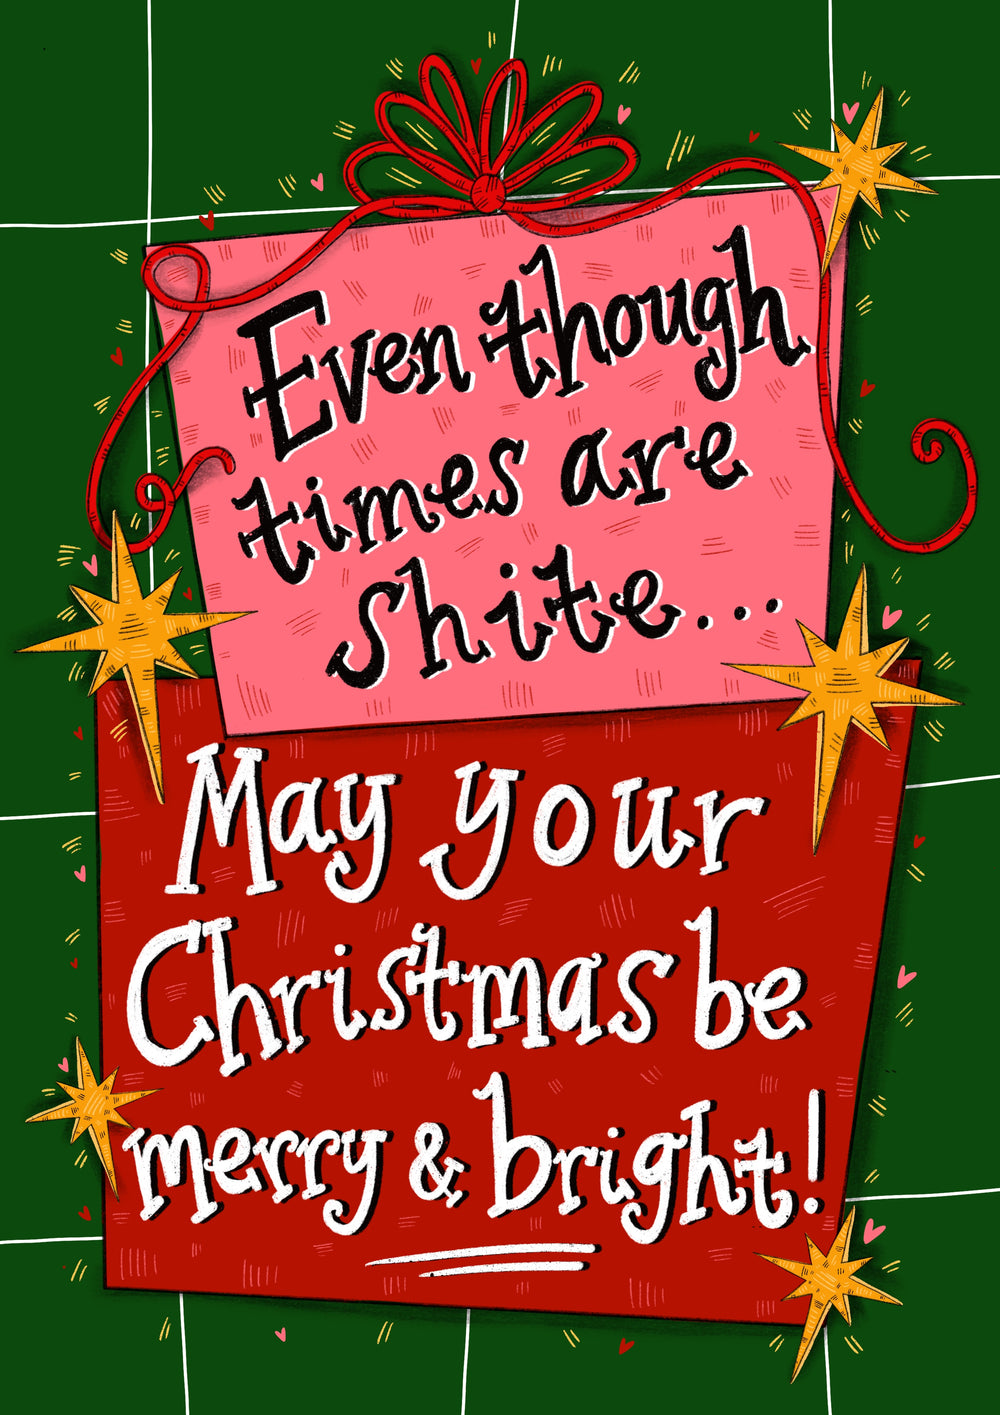 Even though times are sh*te…..May your Christmas be Merry and Bright!  Christmas Card